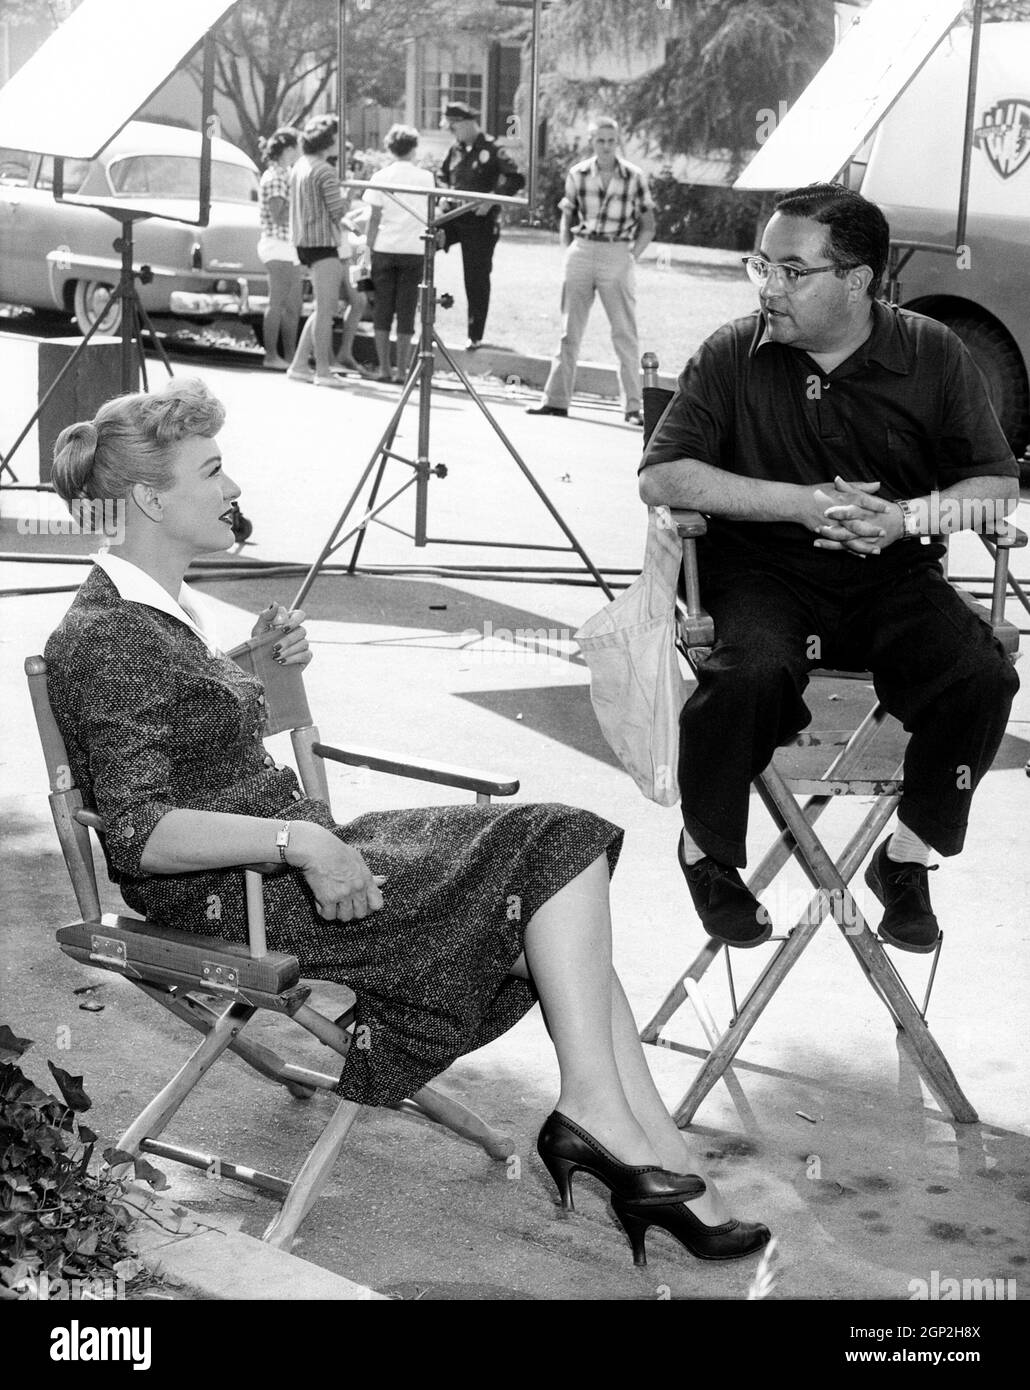 OUR MISS BROOKS, from left: Eve Arden, director Al Lewis, on location, 1956 Stock Photo